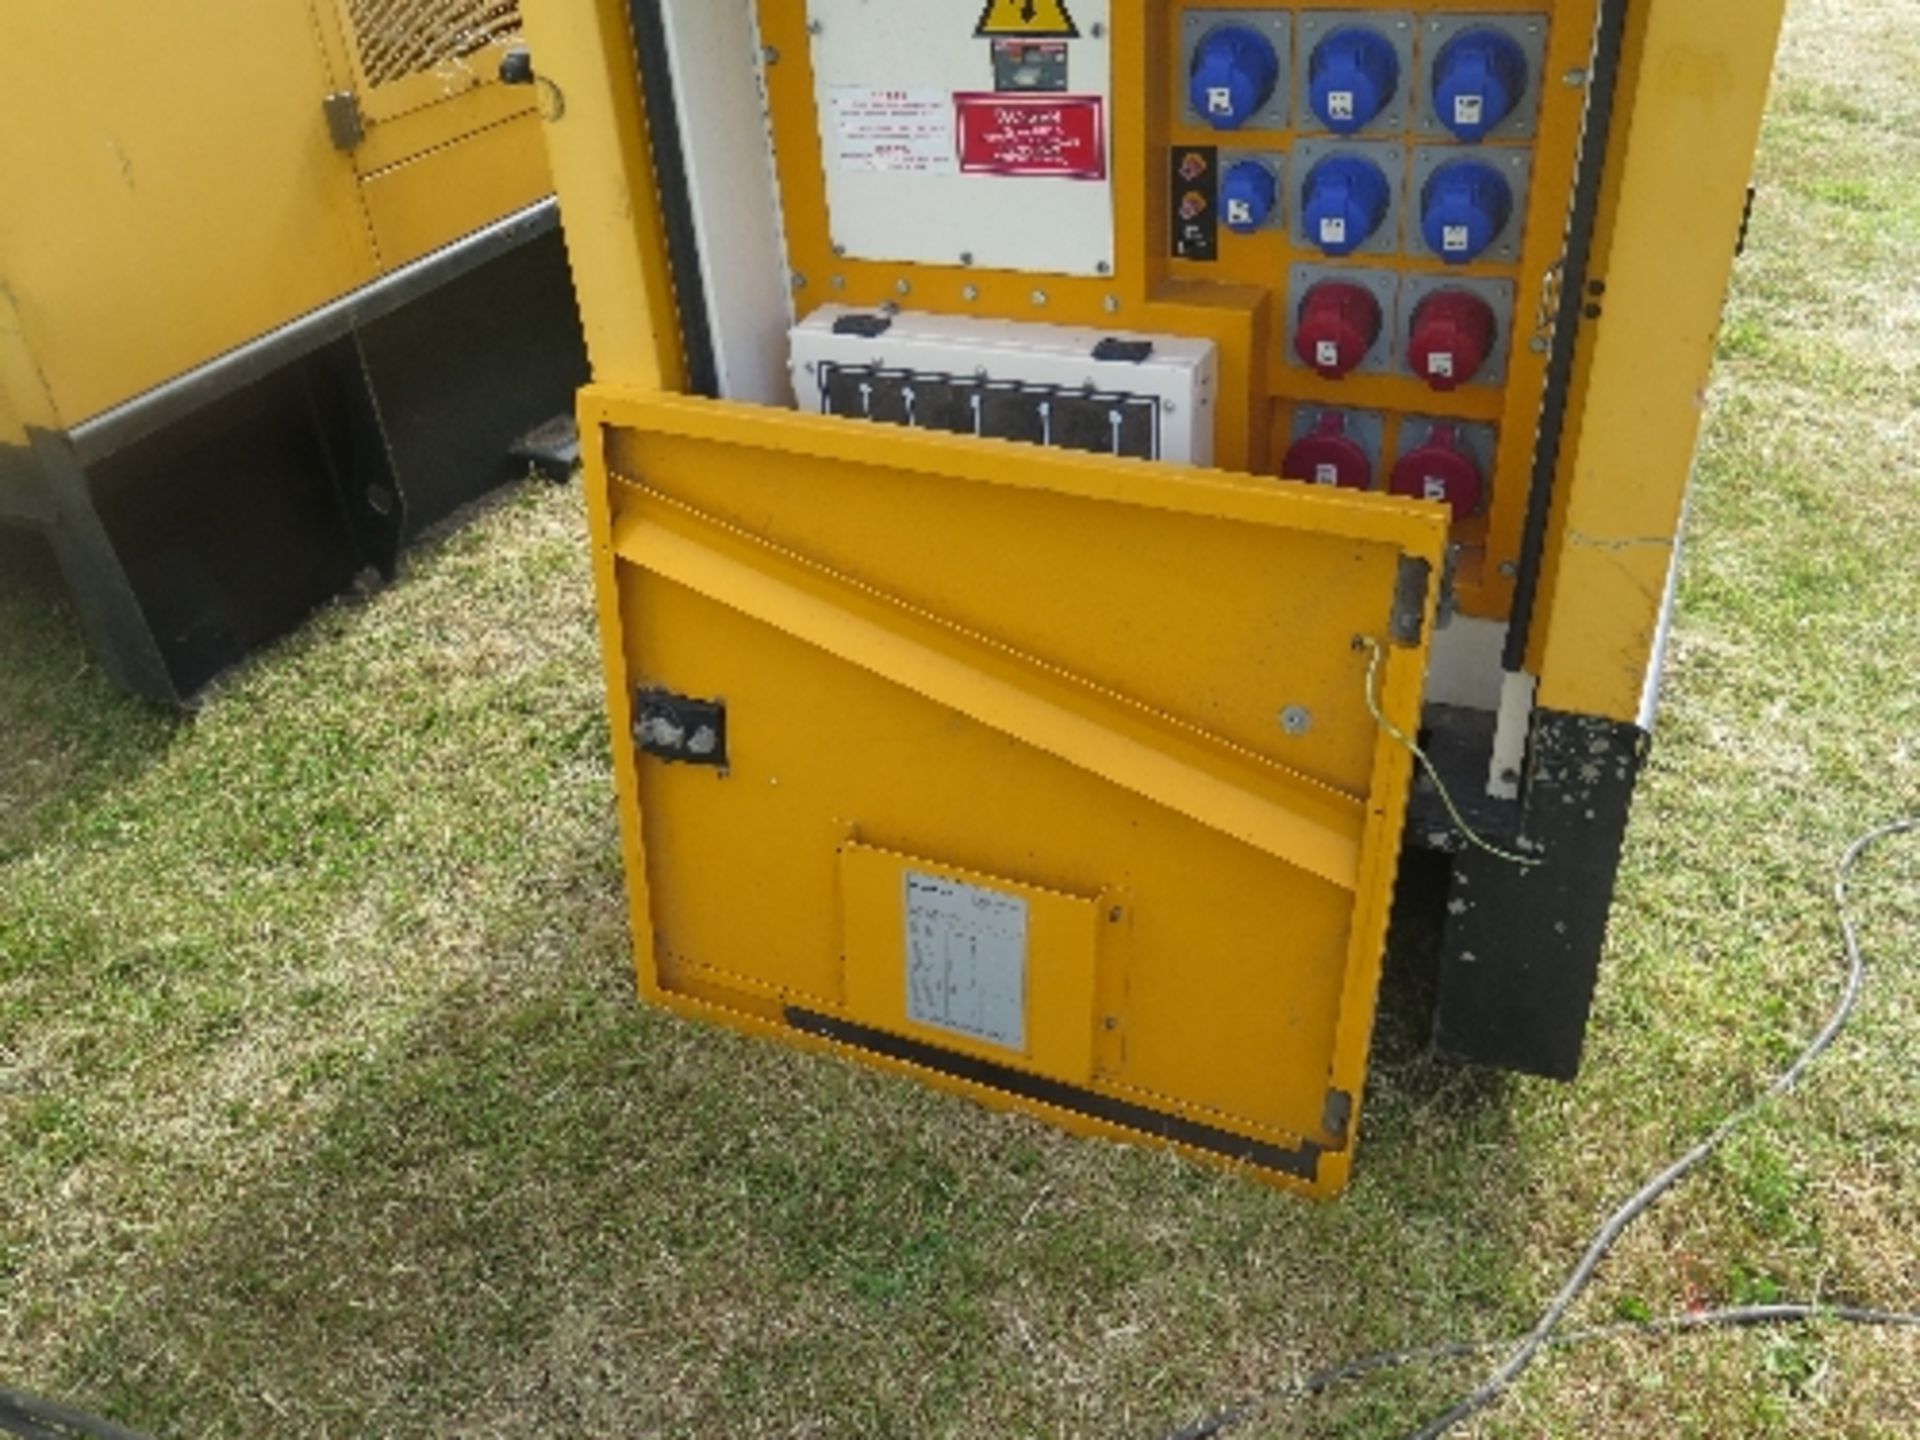 Caterpillar XQE80 generator 5984 hrs 5003853
PERKINS POWER - RUNS AND MAKES POWER
ALL LOTS are - Image 3 of 7